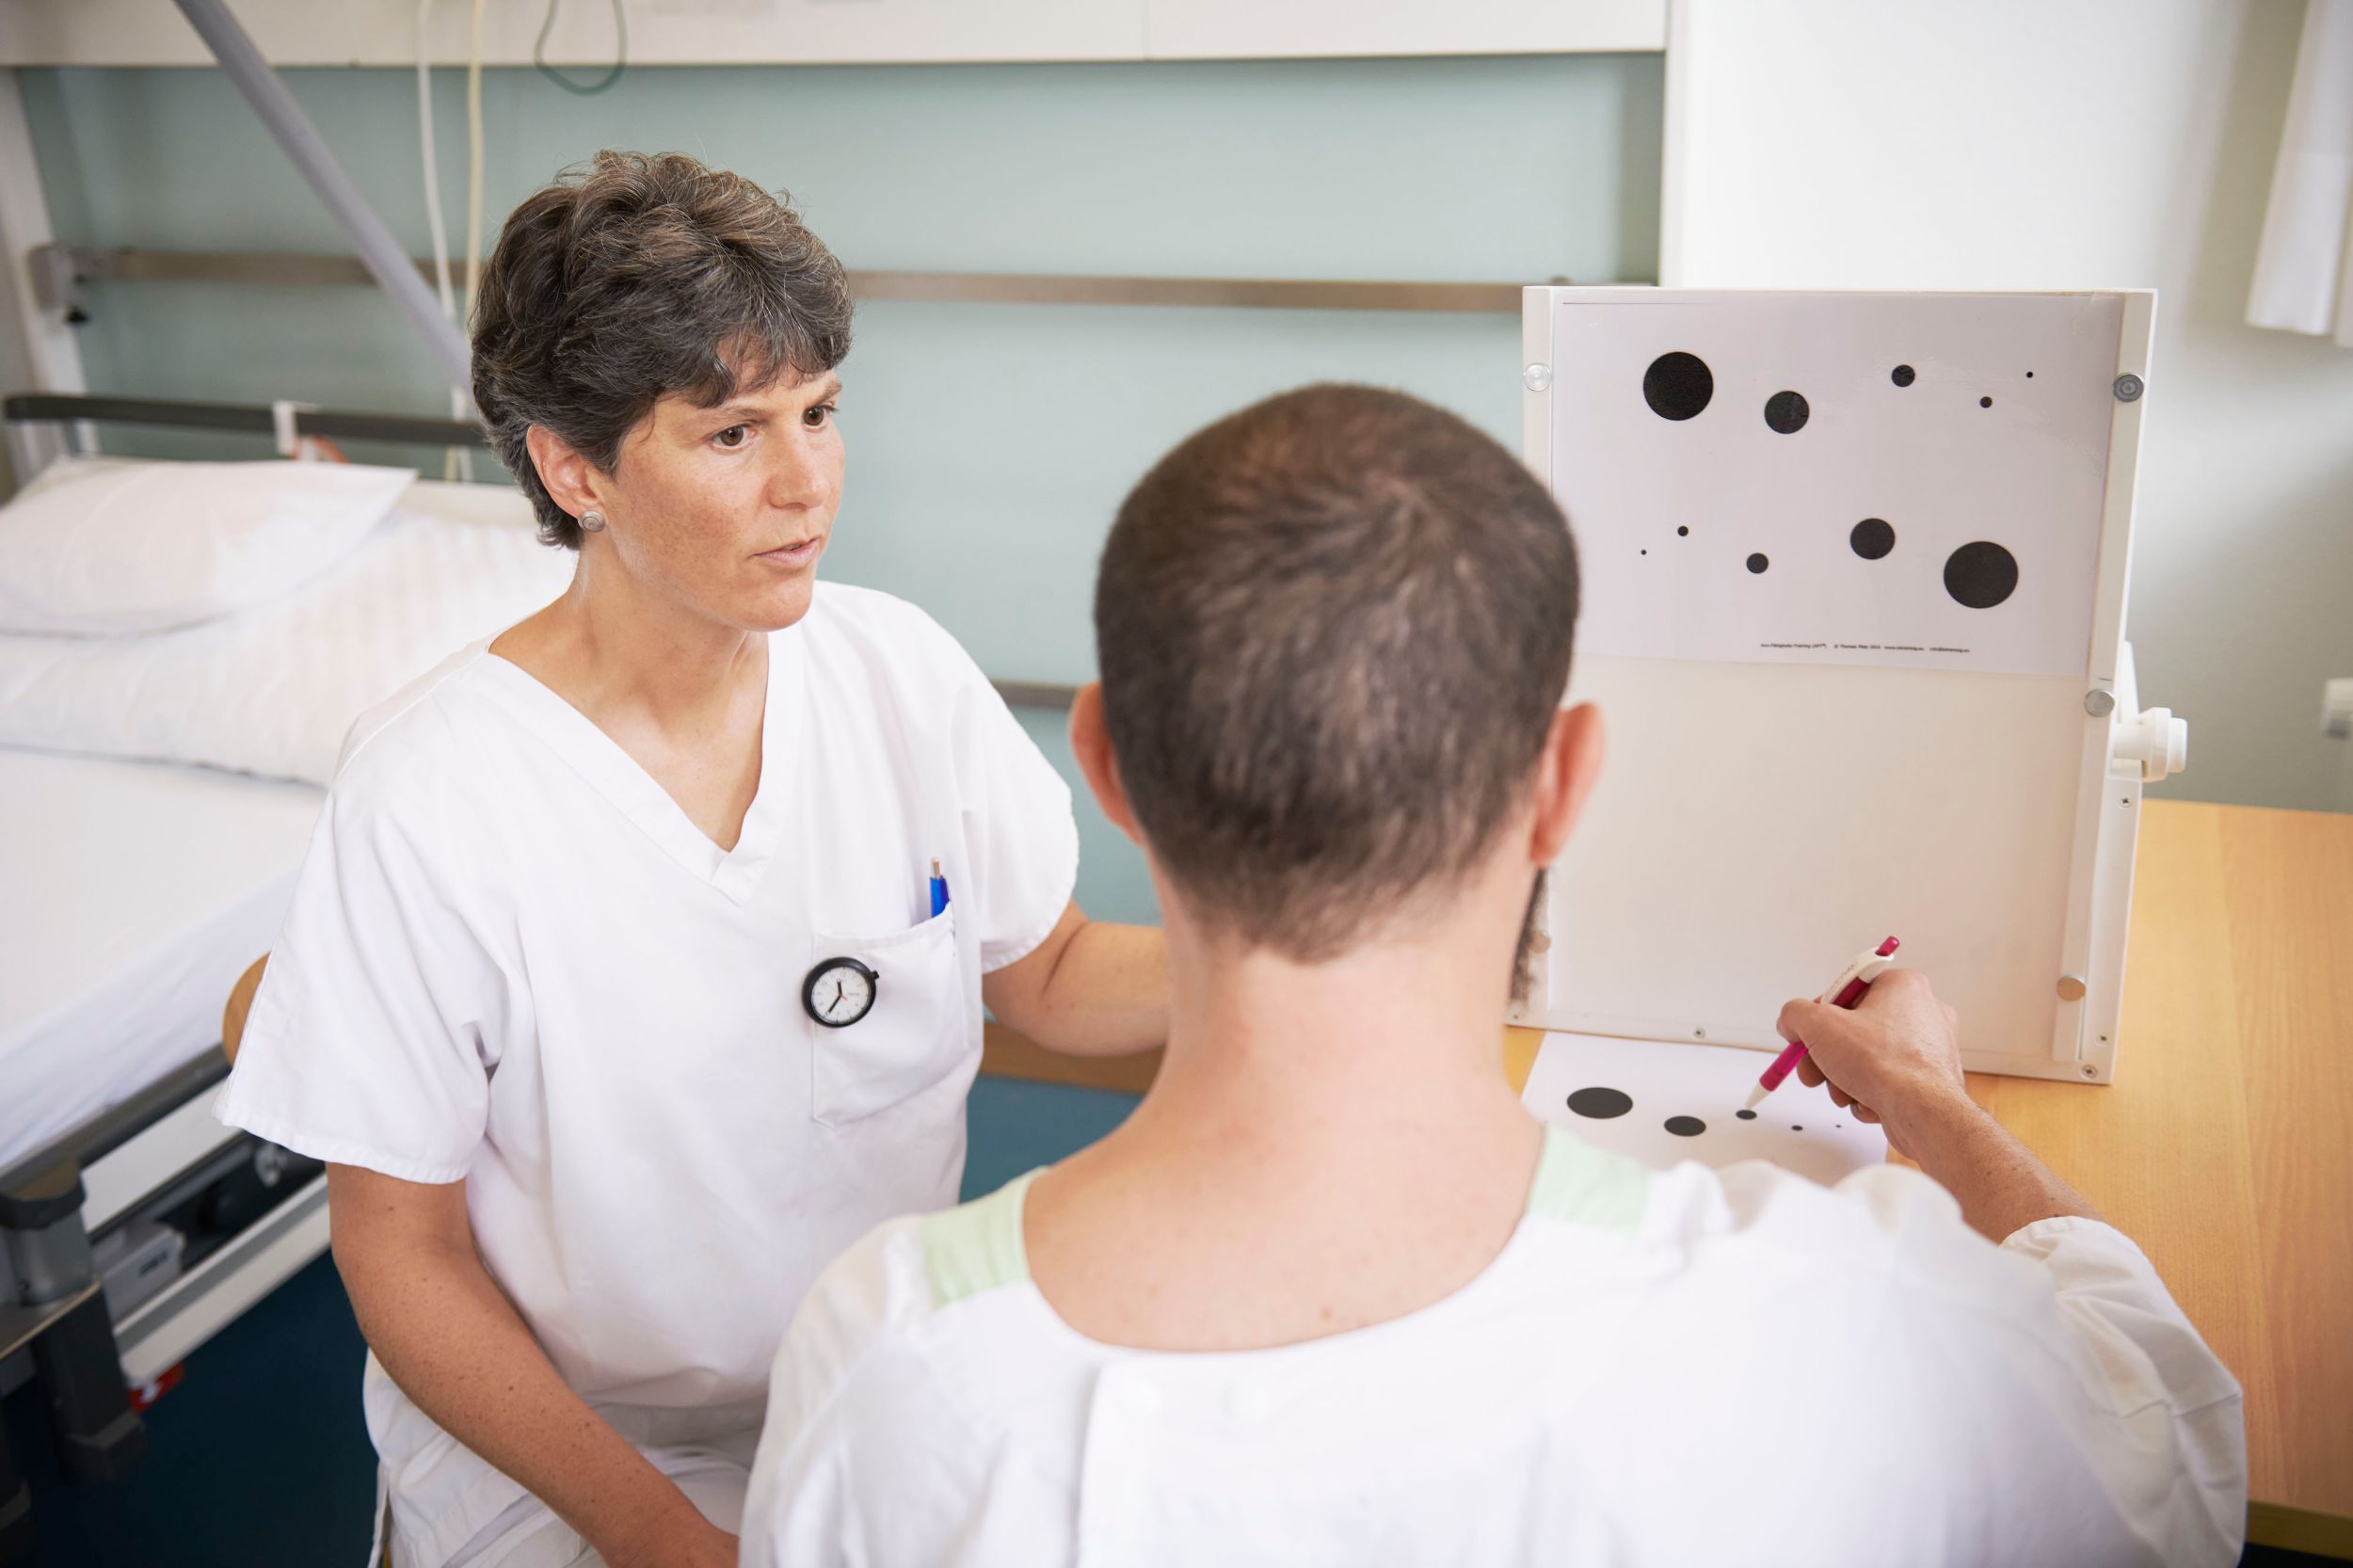 Occupational therapist carries out various tests with the patient